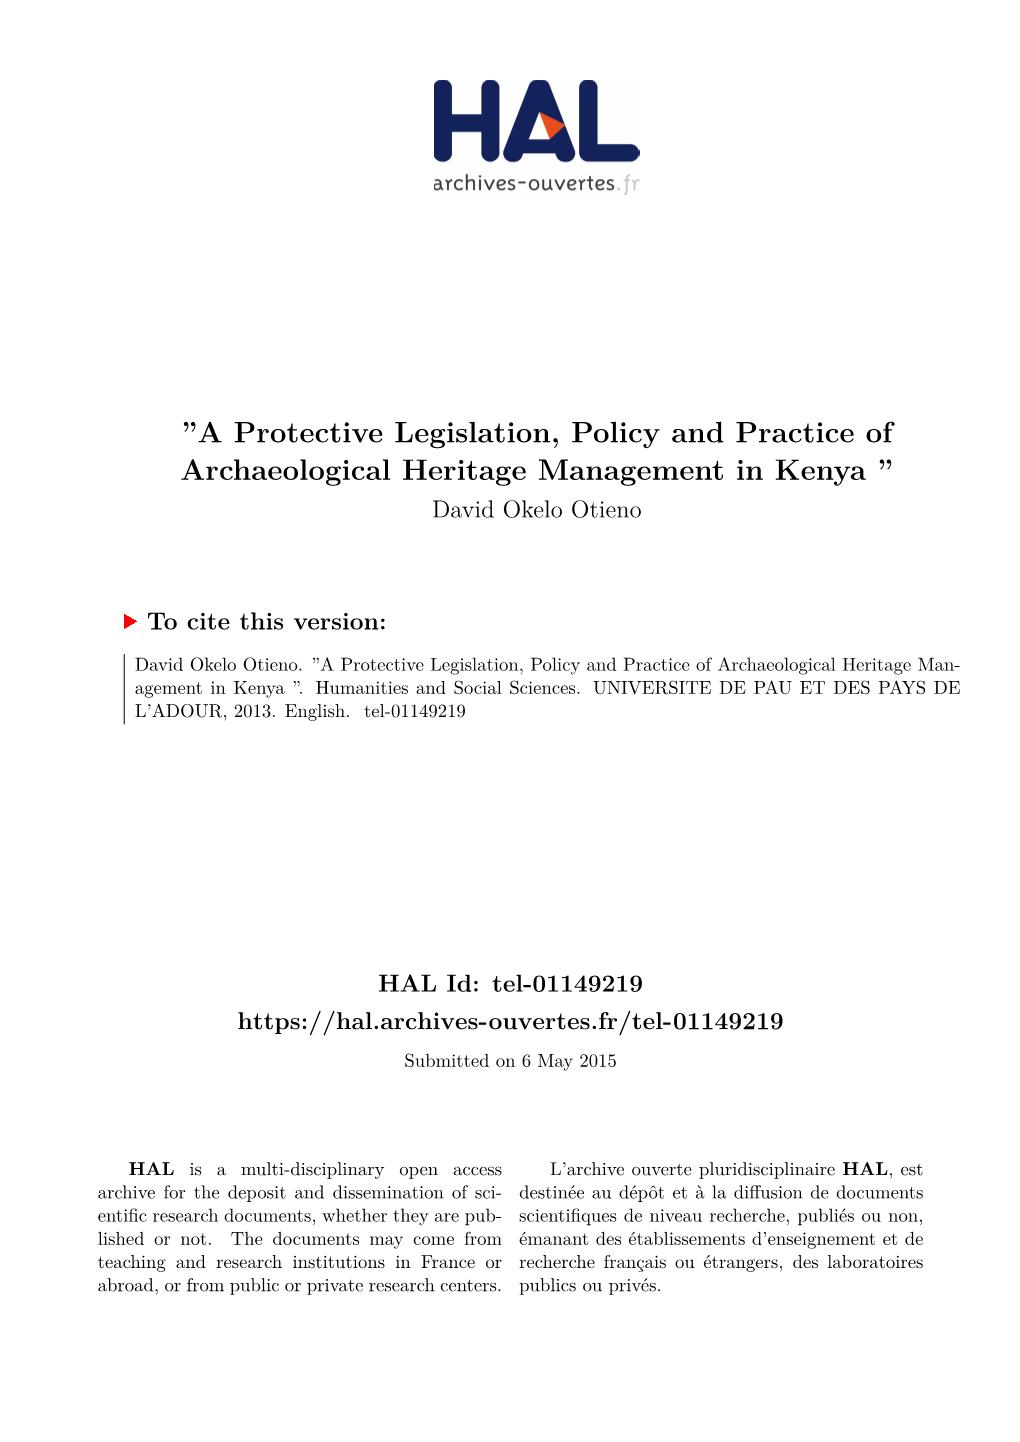 ''A Protective Legislation, Policy and Practice of Archaeological Heritage